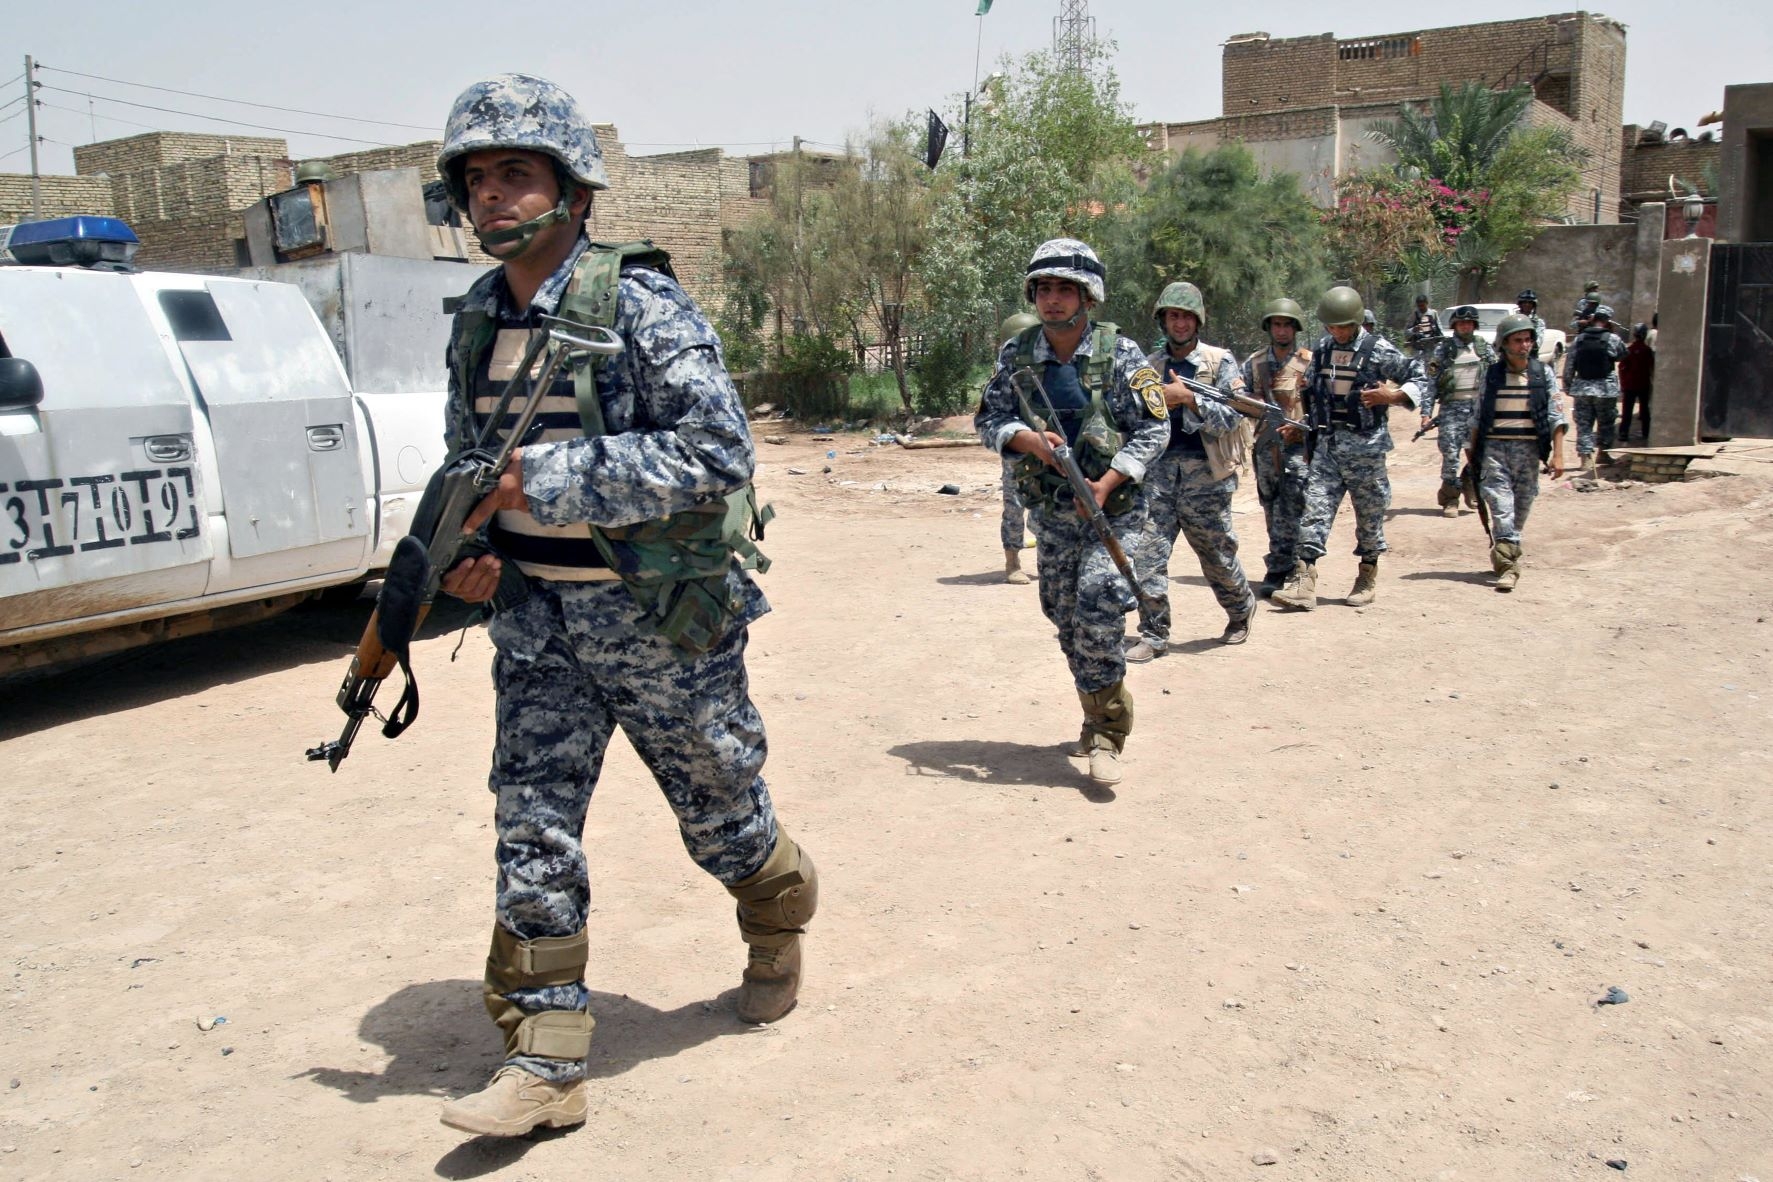 Iraqi police patrol the streets of Amara in Maysan province, 365 kilometres south of Baghdad, on June 19, 2008 (AFP)